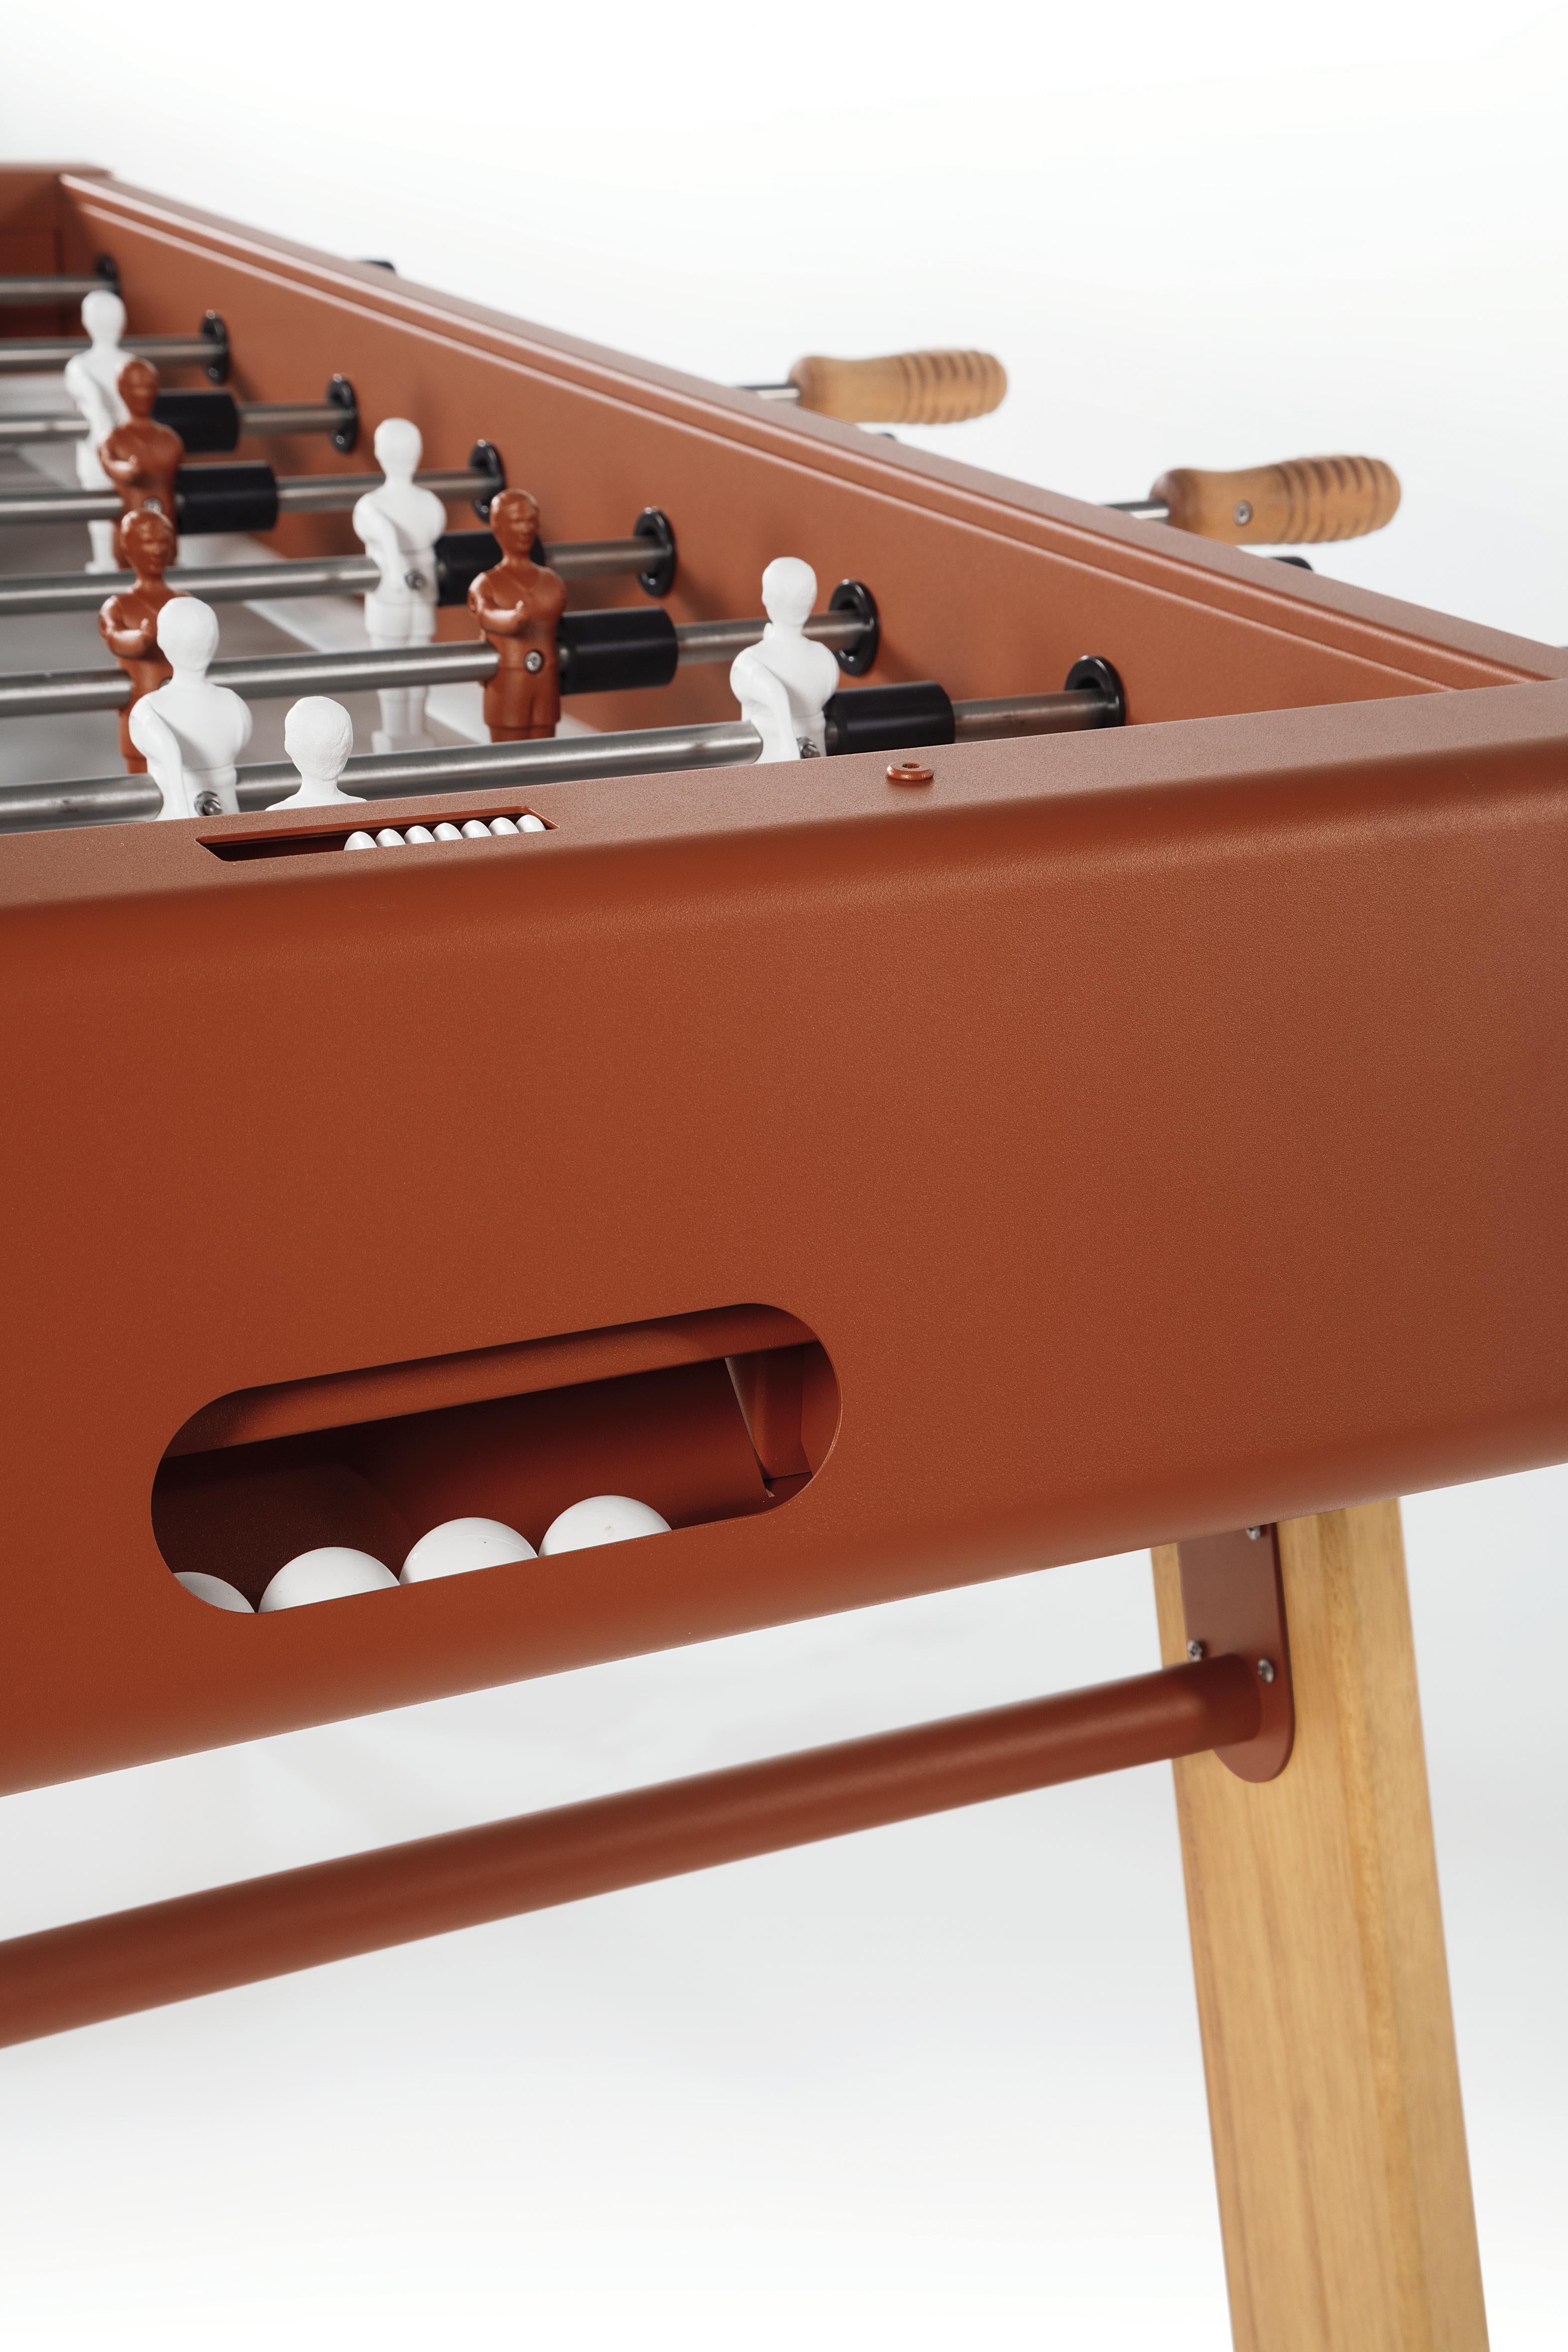 Spanish RS Barcelona RS4 Home Foosball Table in Terracotta For Sale